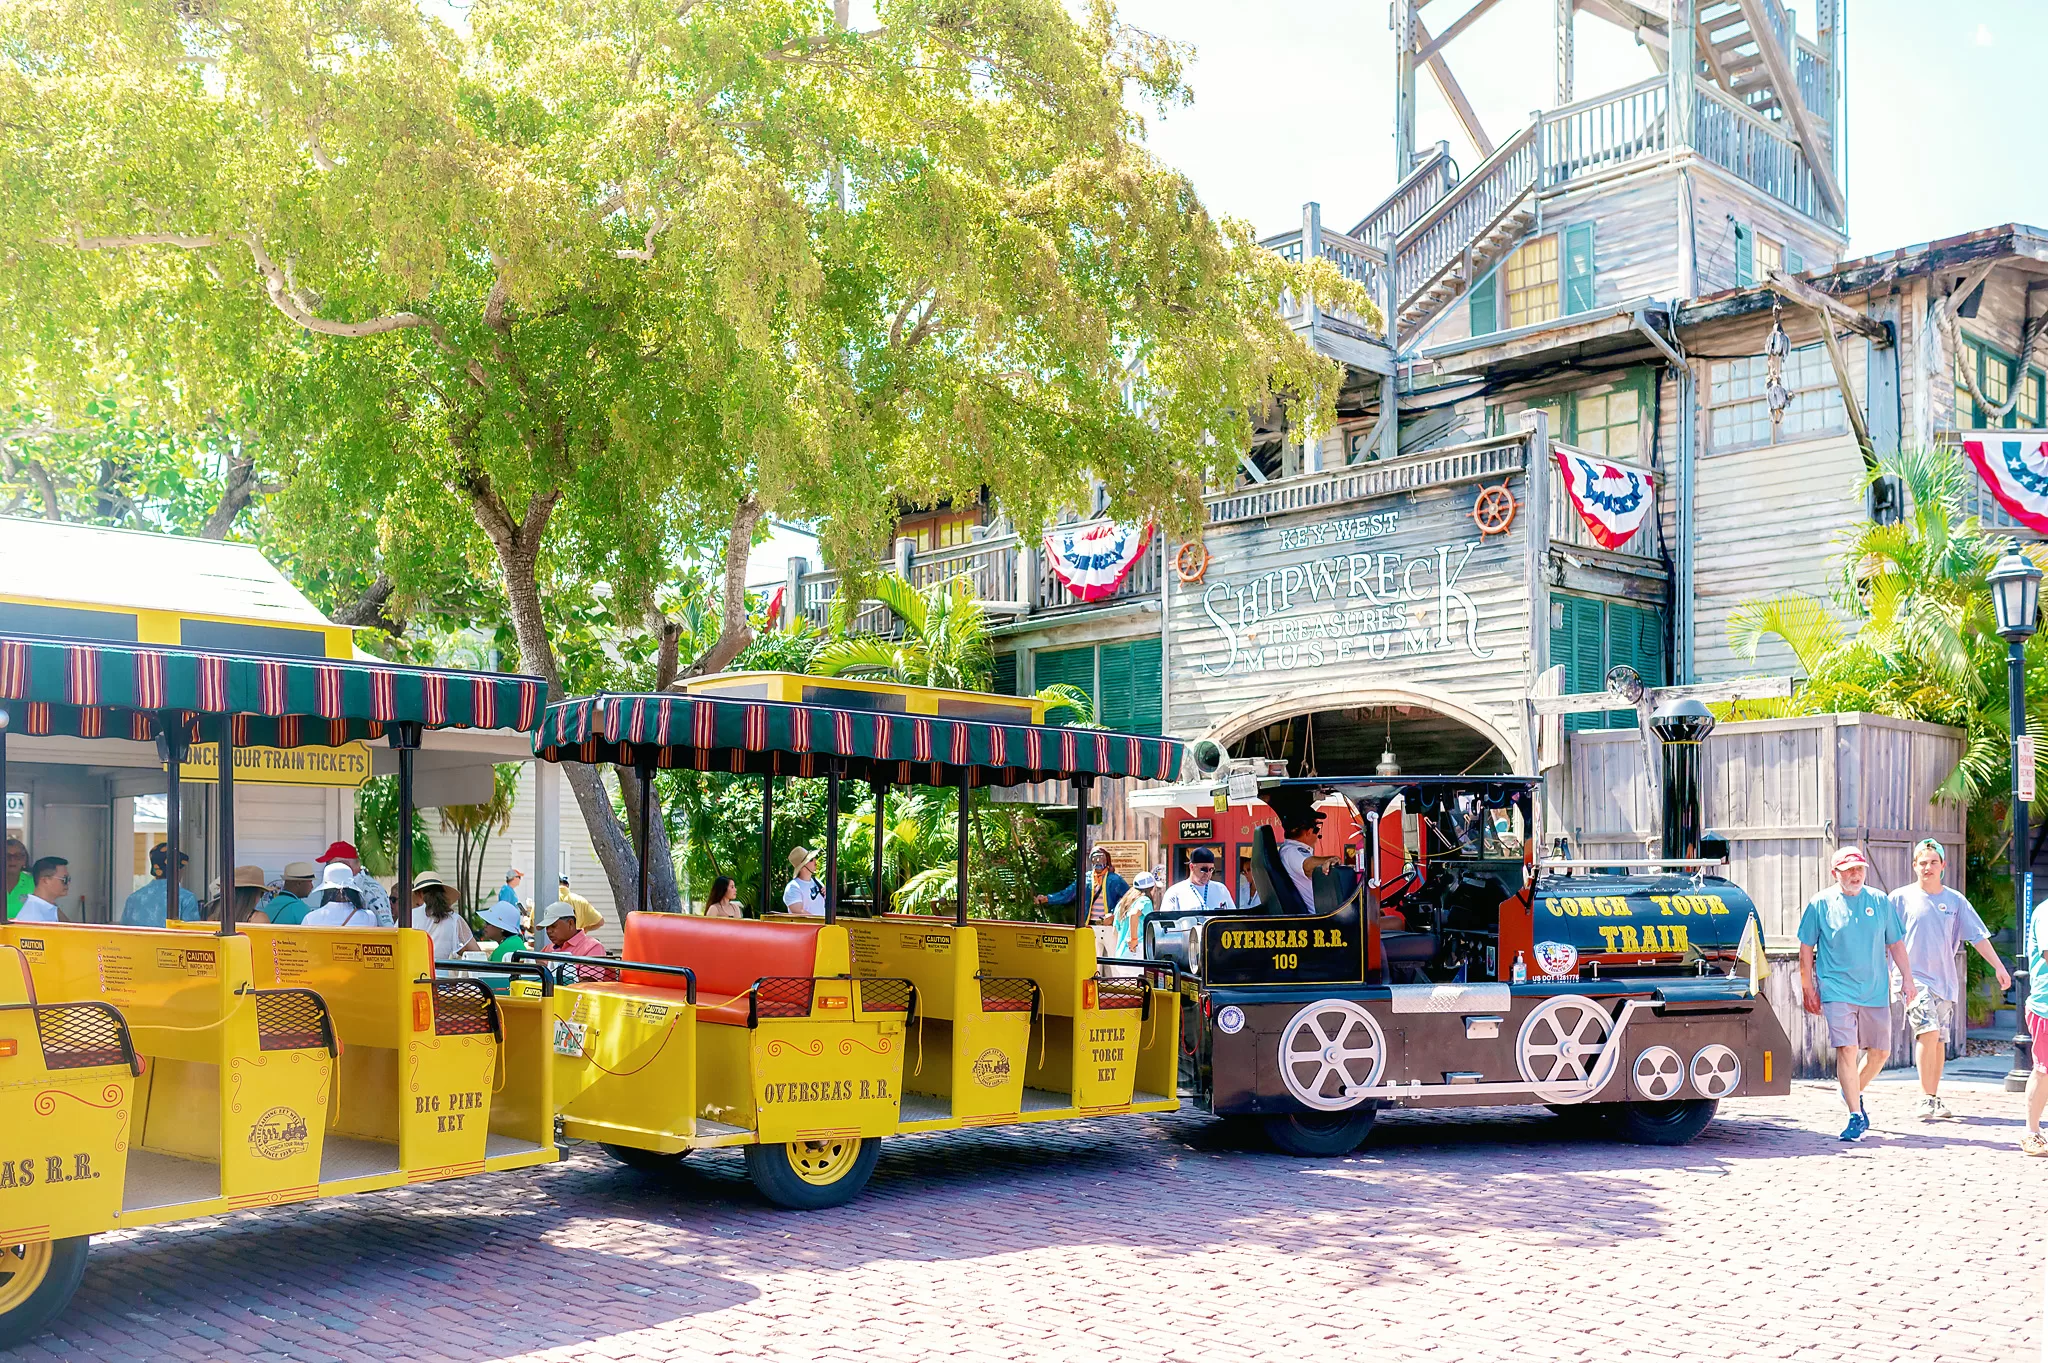 Photo of Key West Conch Train in front of the shipwreck museum. The train is yellow and open air.